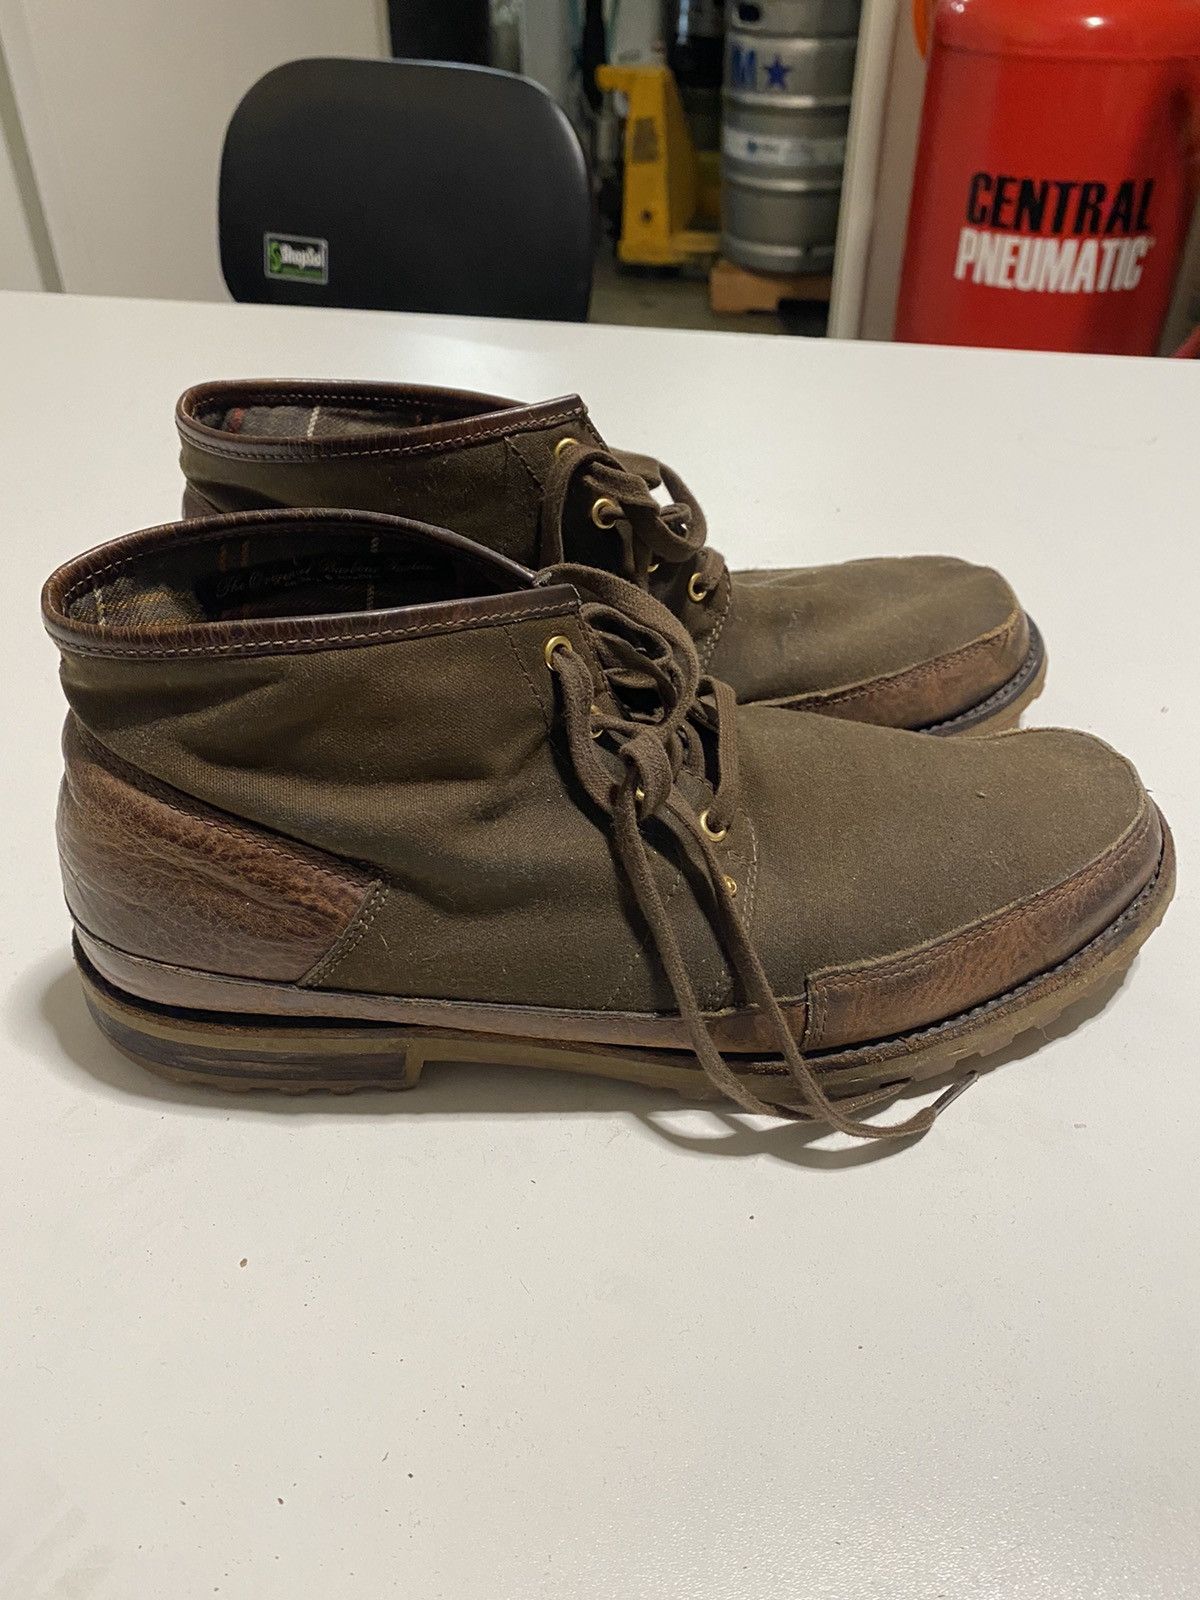 Barbour Rockport x Barbour Chukka Boot | Grailed